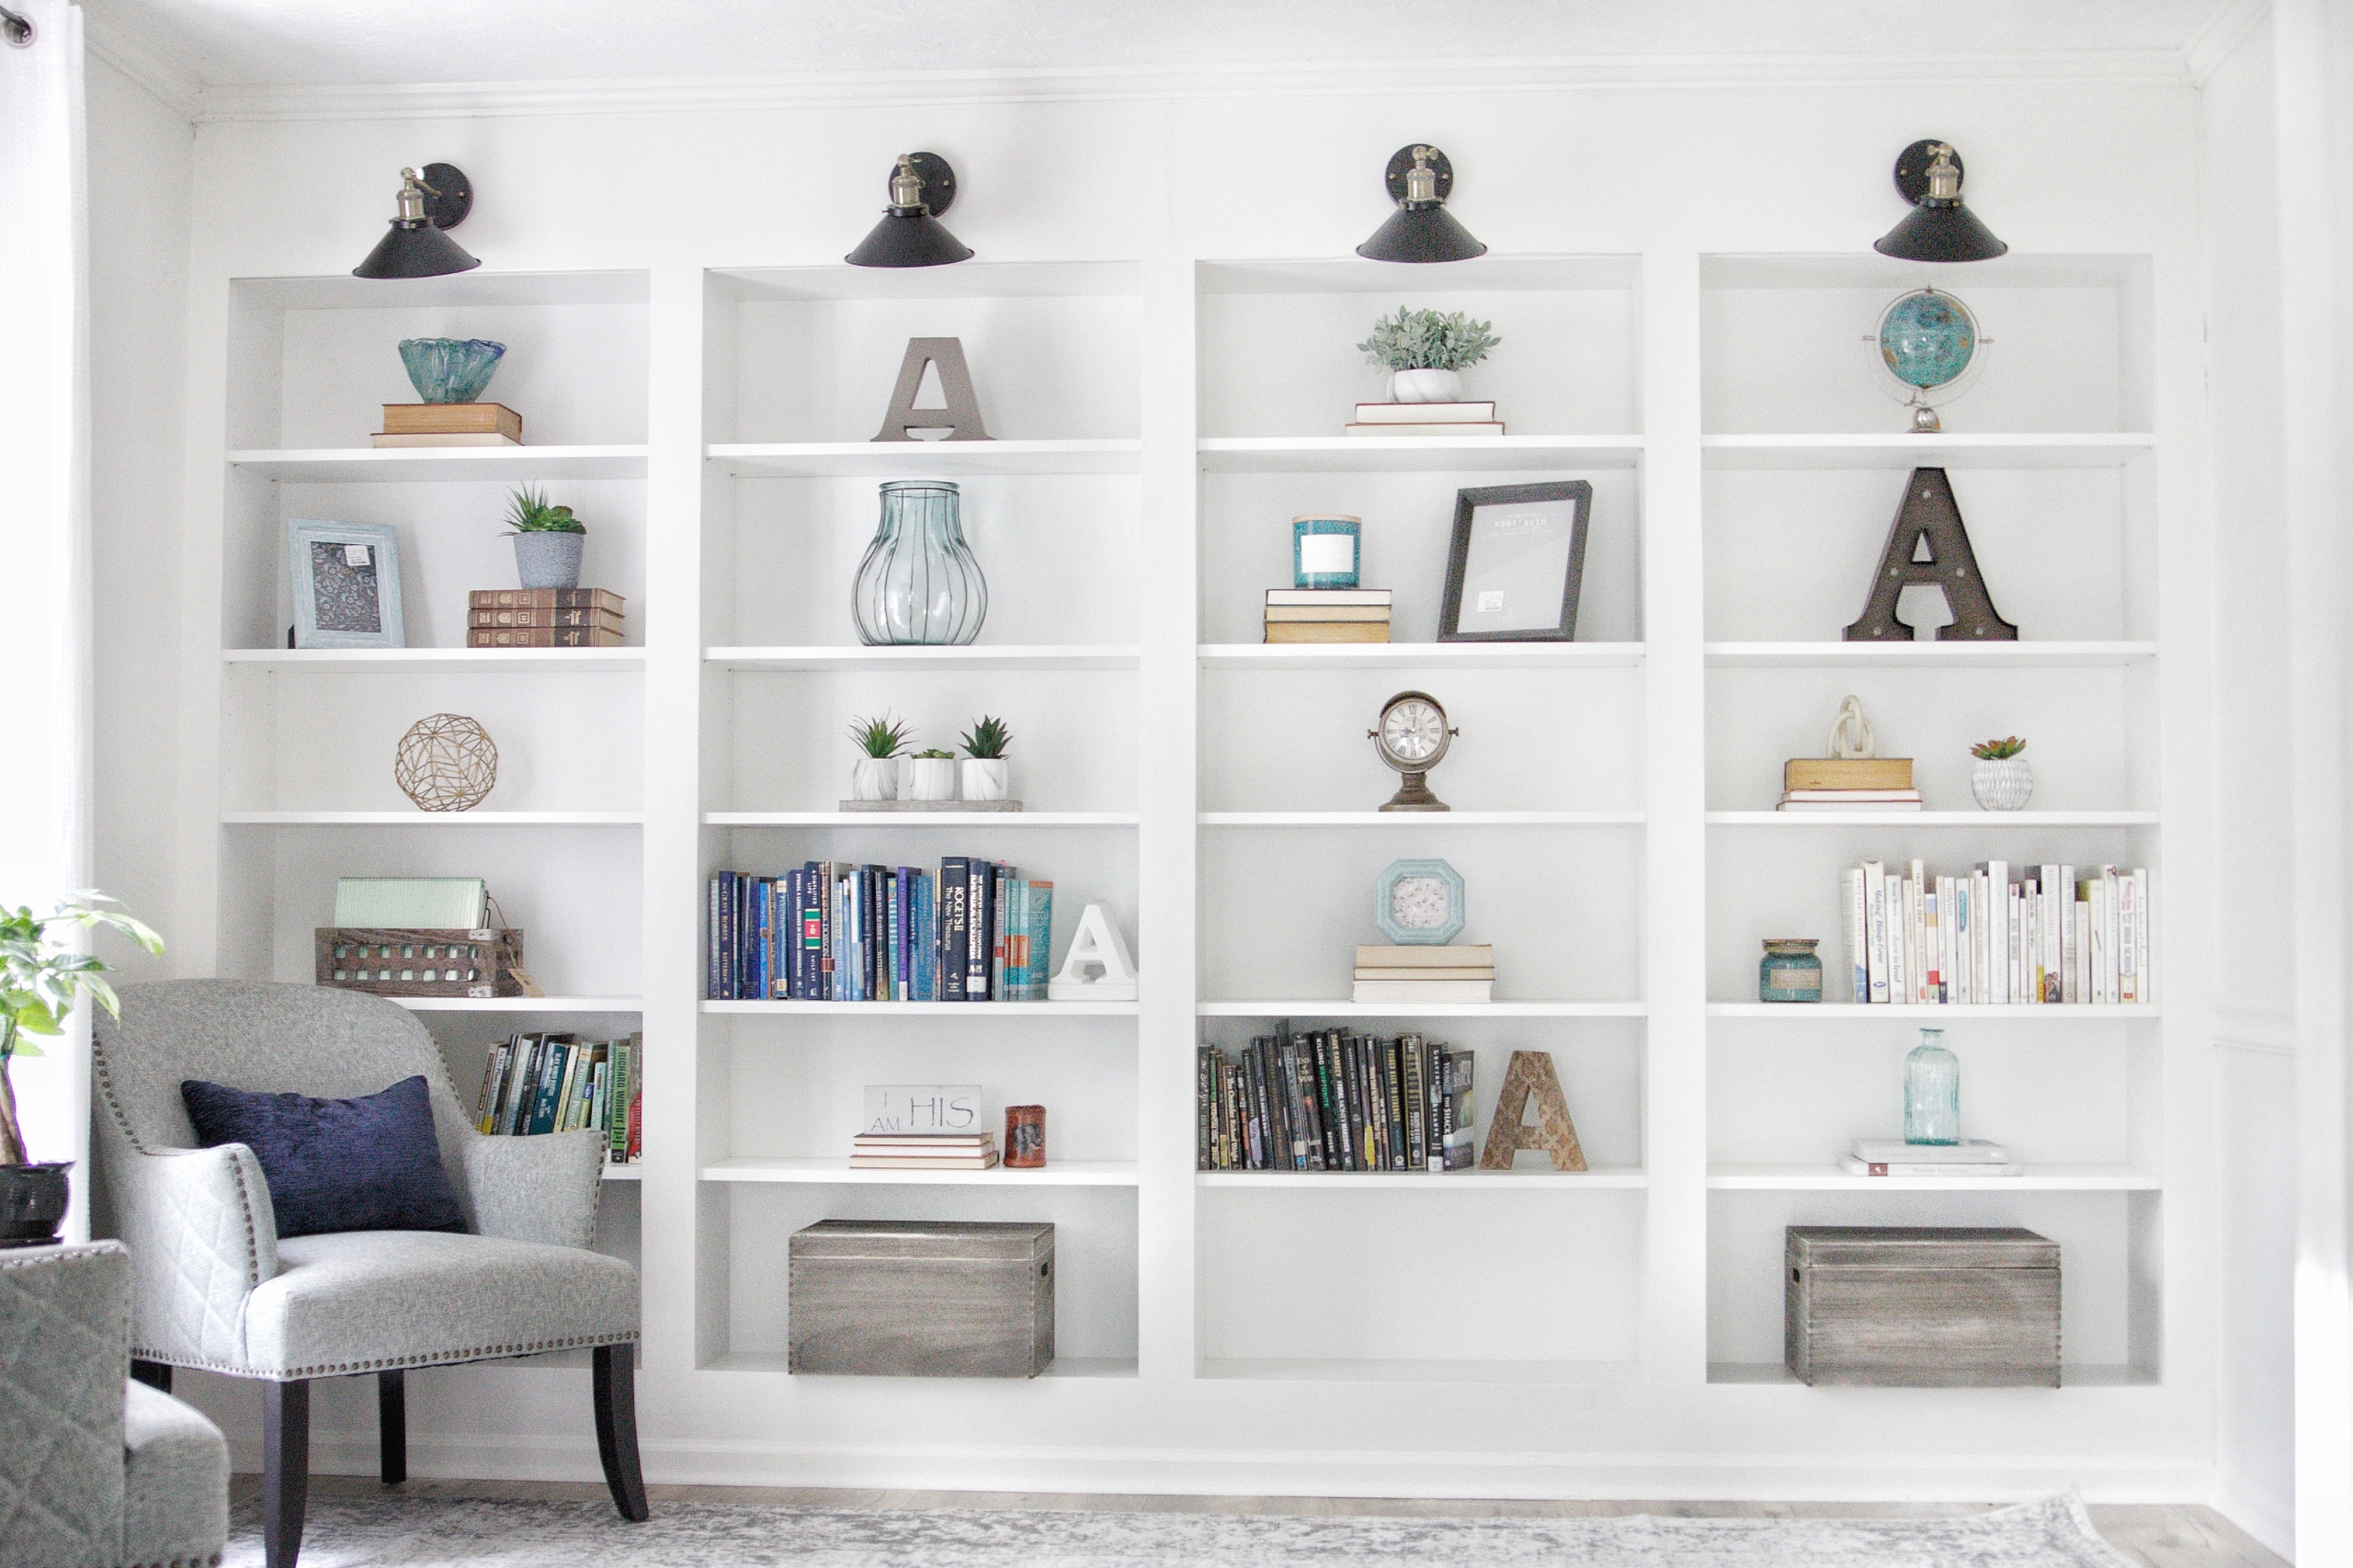 Diy Built Ins Using Ikea Billy, How To Build Billy Bookcase